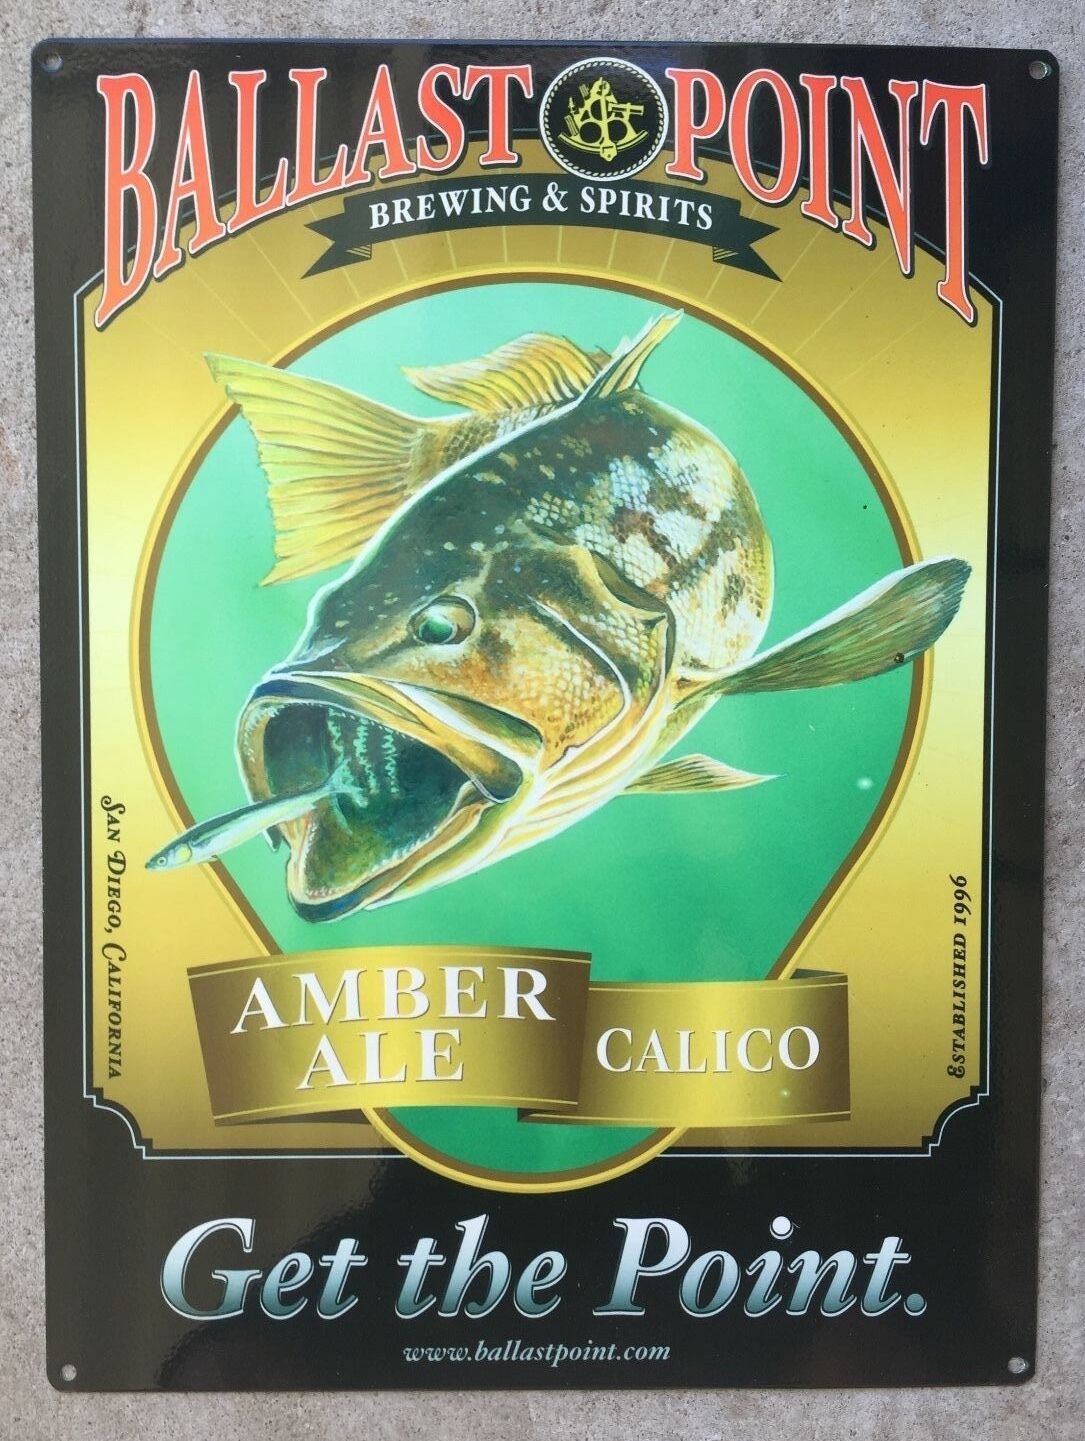 Ballast Point Calico Amber Ale Craft Beer Brewery Brew Fish Poster Metal Sign CA